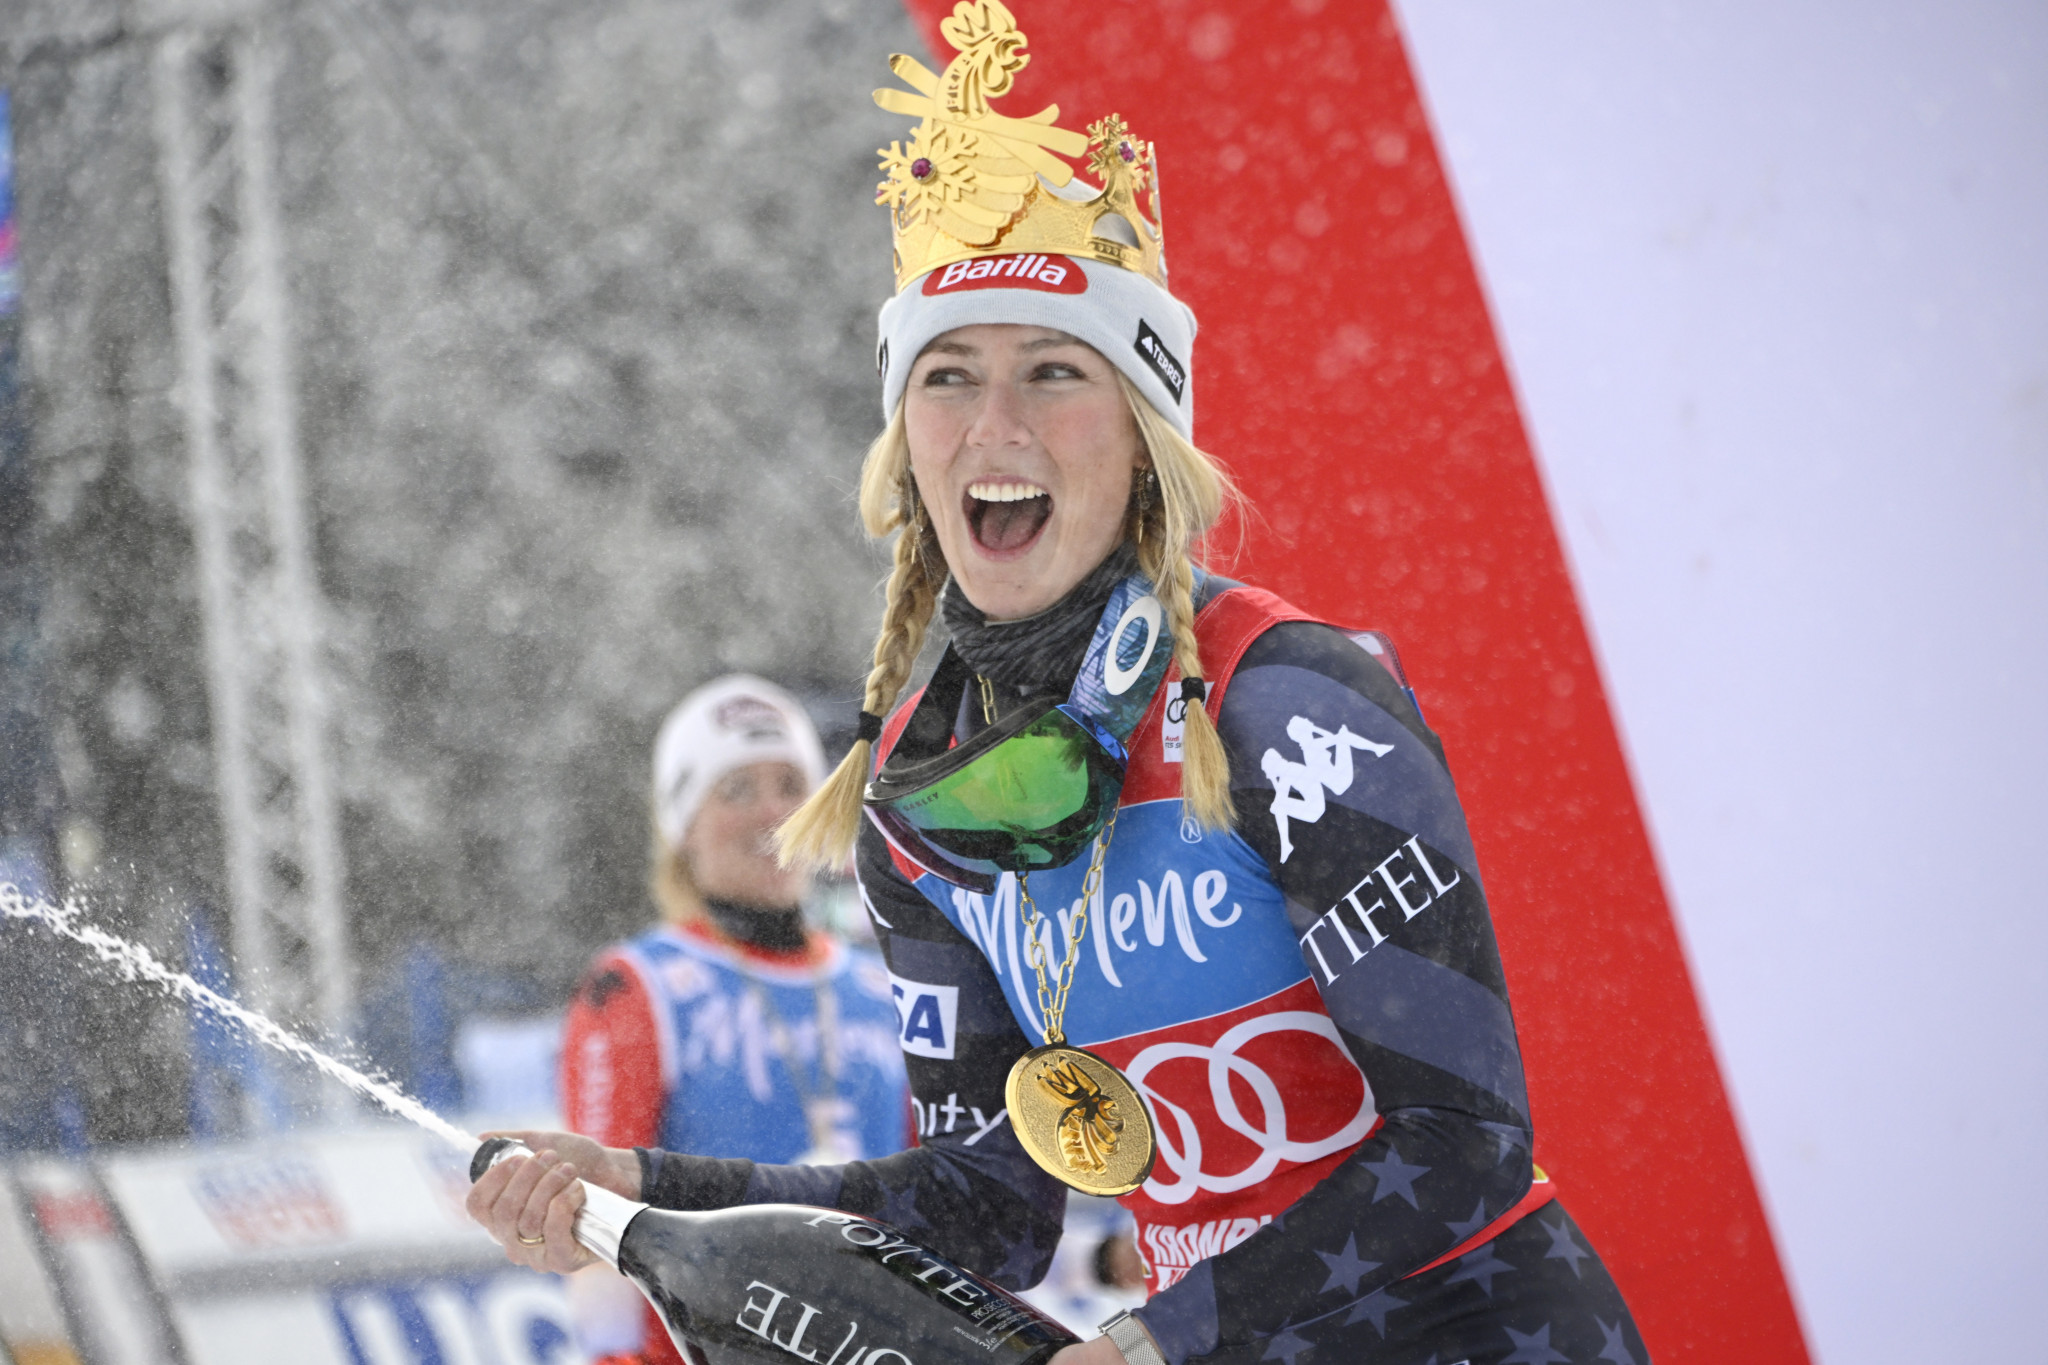 The United States' Mikaela Shiffrin set an FIS Alpine Ski World Cup record with the 83rd victory of her career in Kronplatz today ©Getty Images